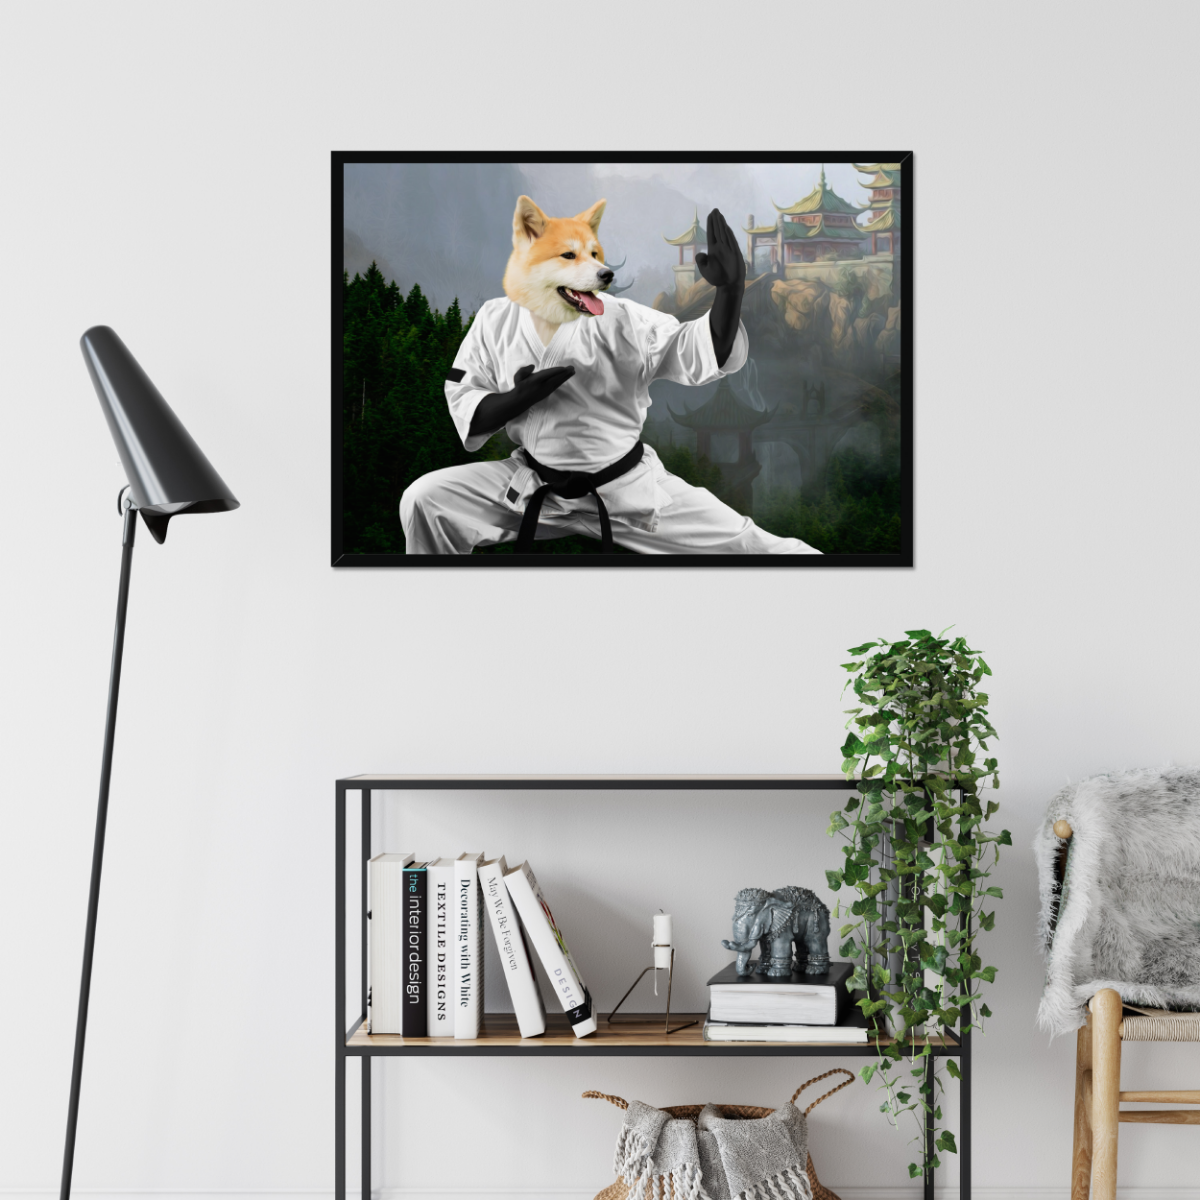 The Karate Master: Custom Pet Portrait - Paw & Glory, paw and glory, custom painting dog, pet paintings in costume, turner & walker, pet portraits from photos prices uk, dog paintings, personalised cat canvas, pet portrait